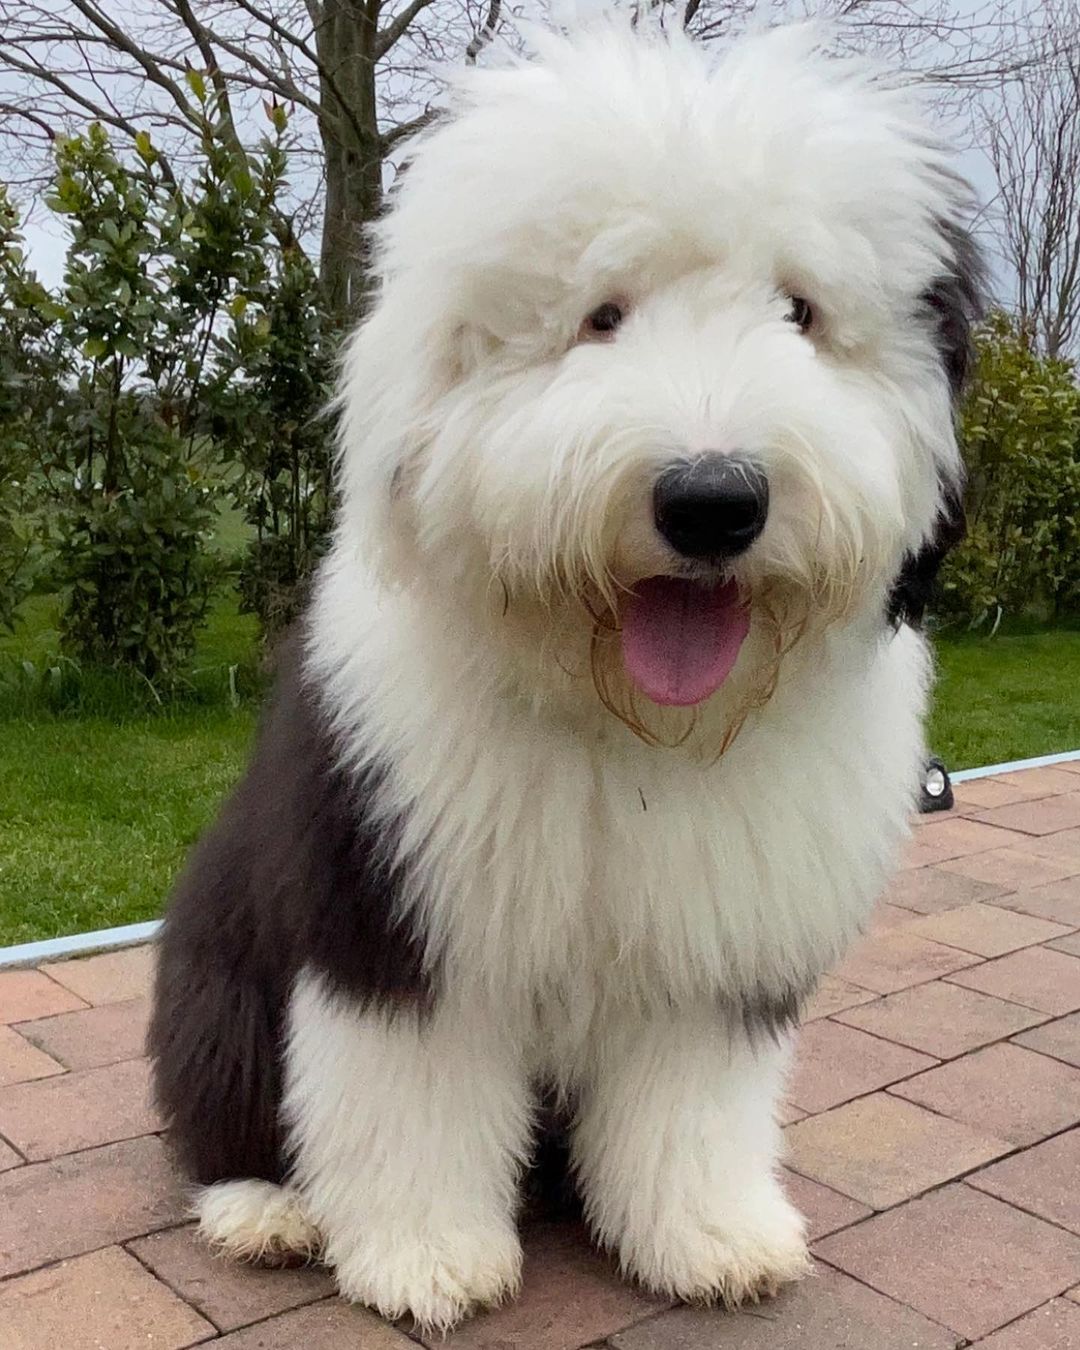 16 Facts About Raising and Training Old English Sheepdogs - Page 3 of 6 ...